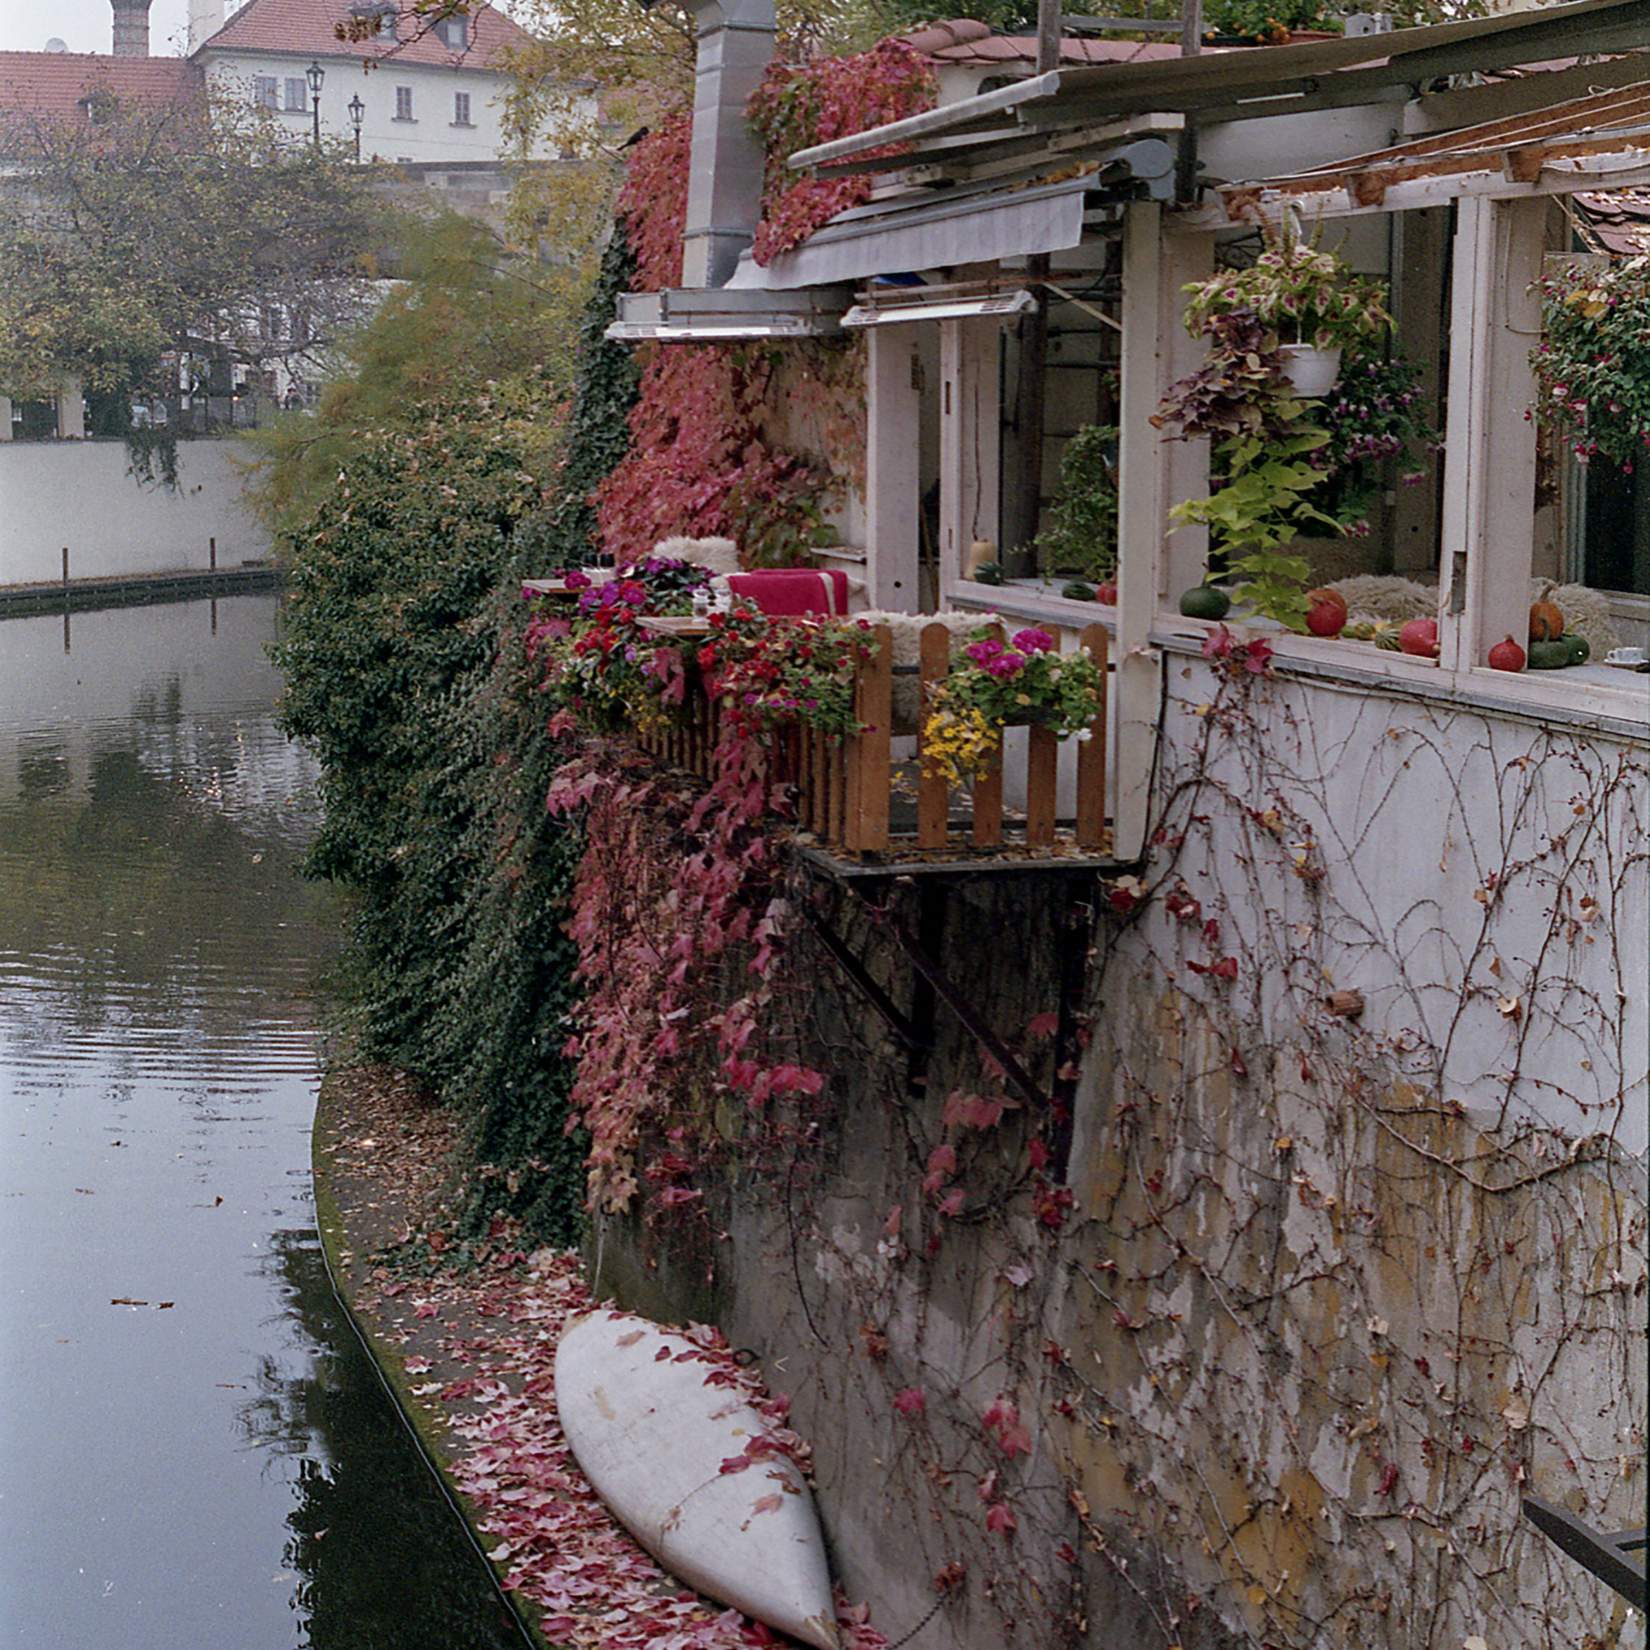 Photo of boats and flowers